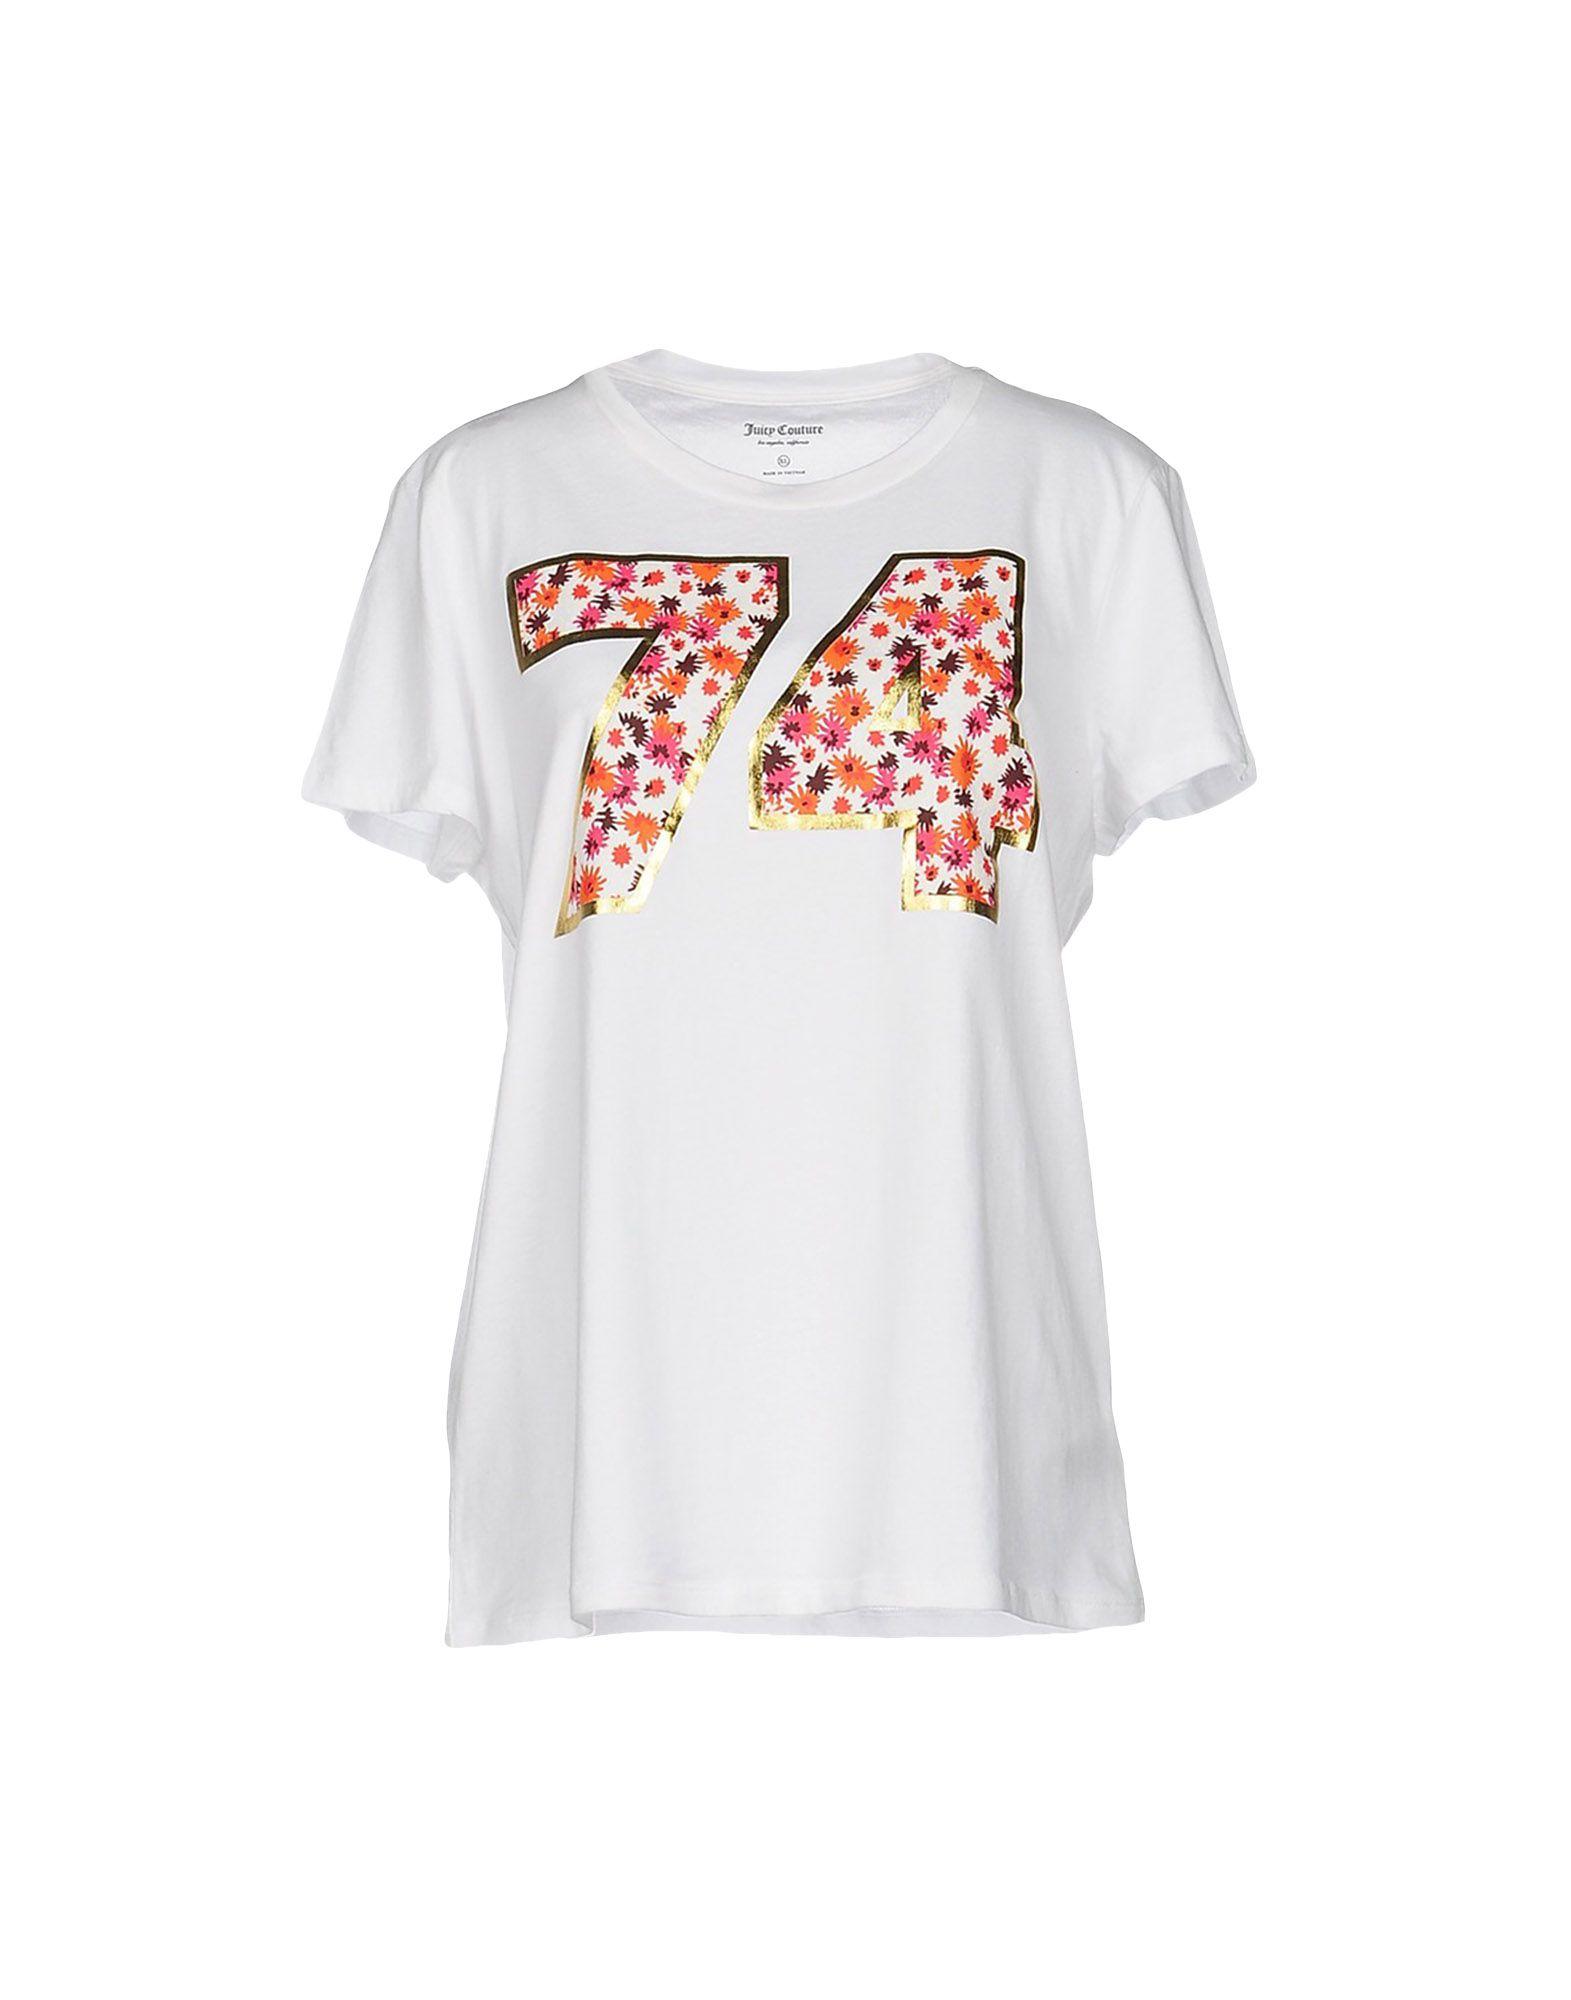 Juicy couture T-shirt in White | Lyst